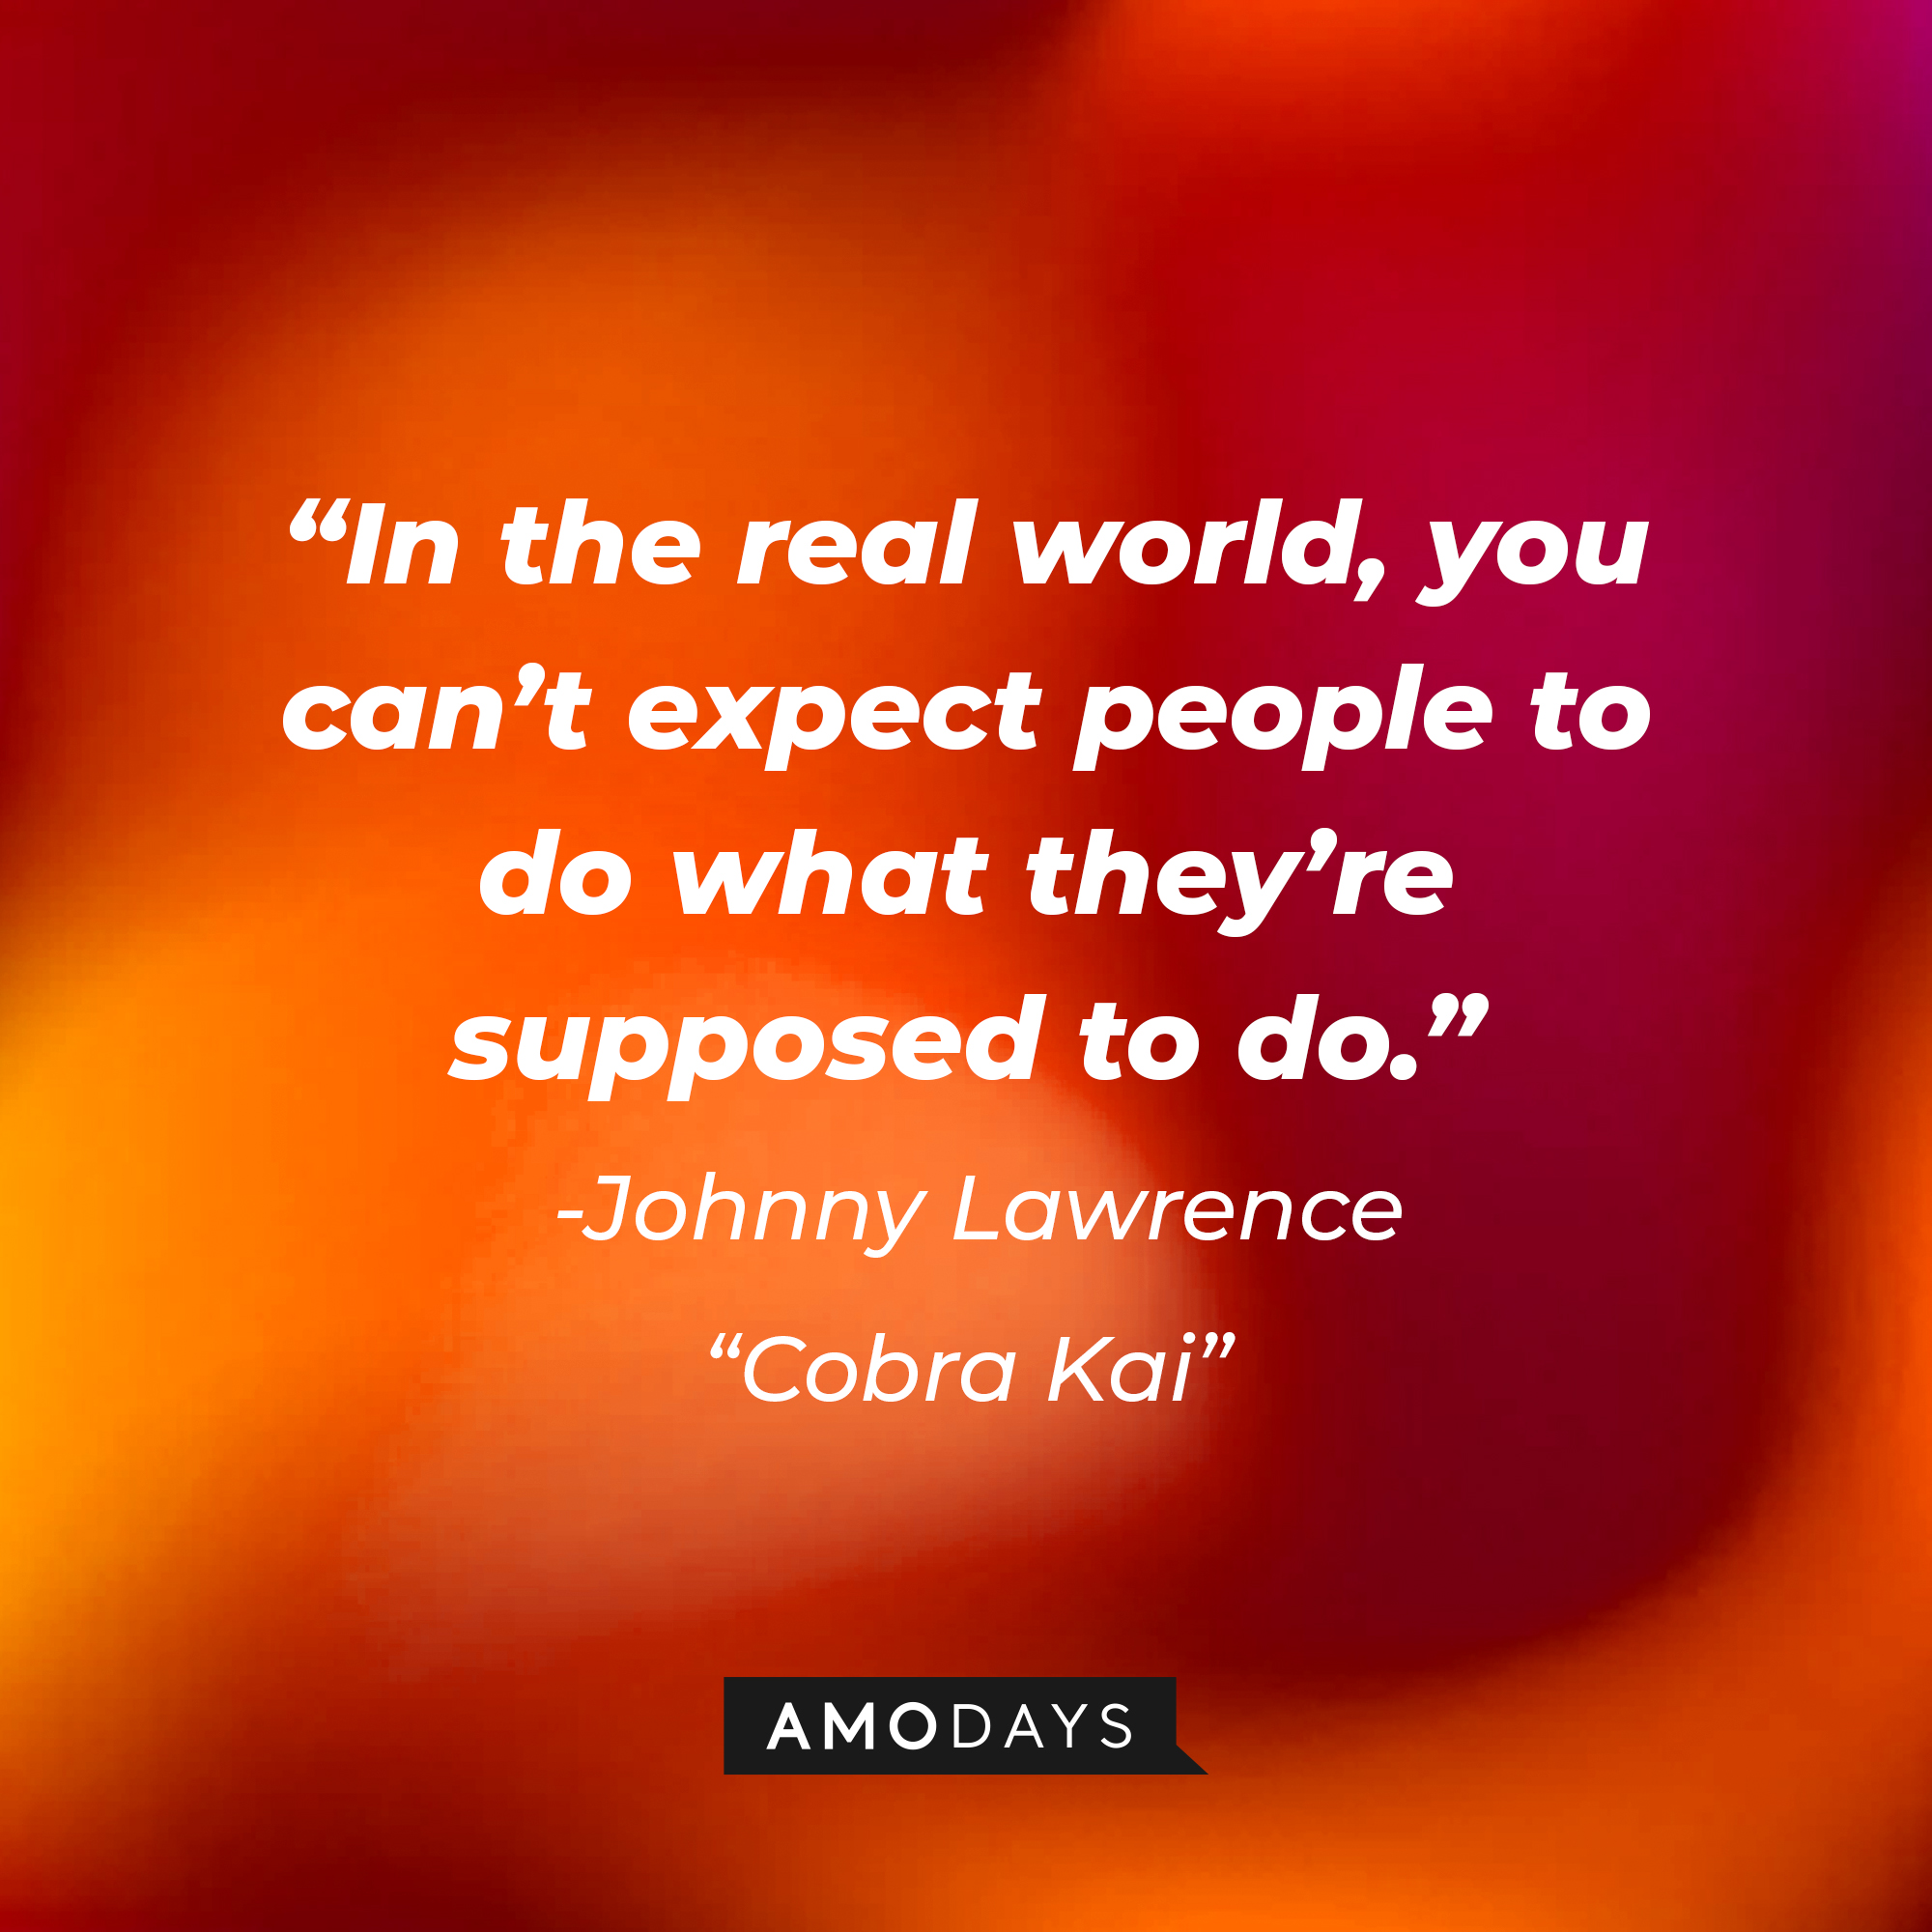 Johnny Lawrence's quote from "Cobra Kai:" “In the real world, you can’t expect people to do what they’re supposed to do.” | Source: AmoDays